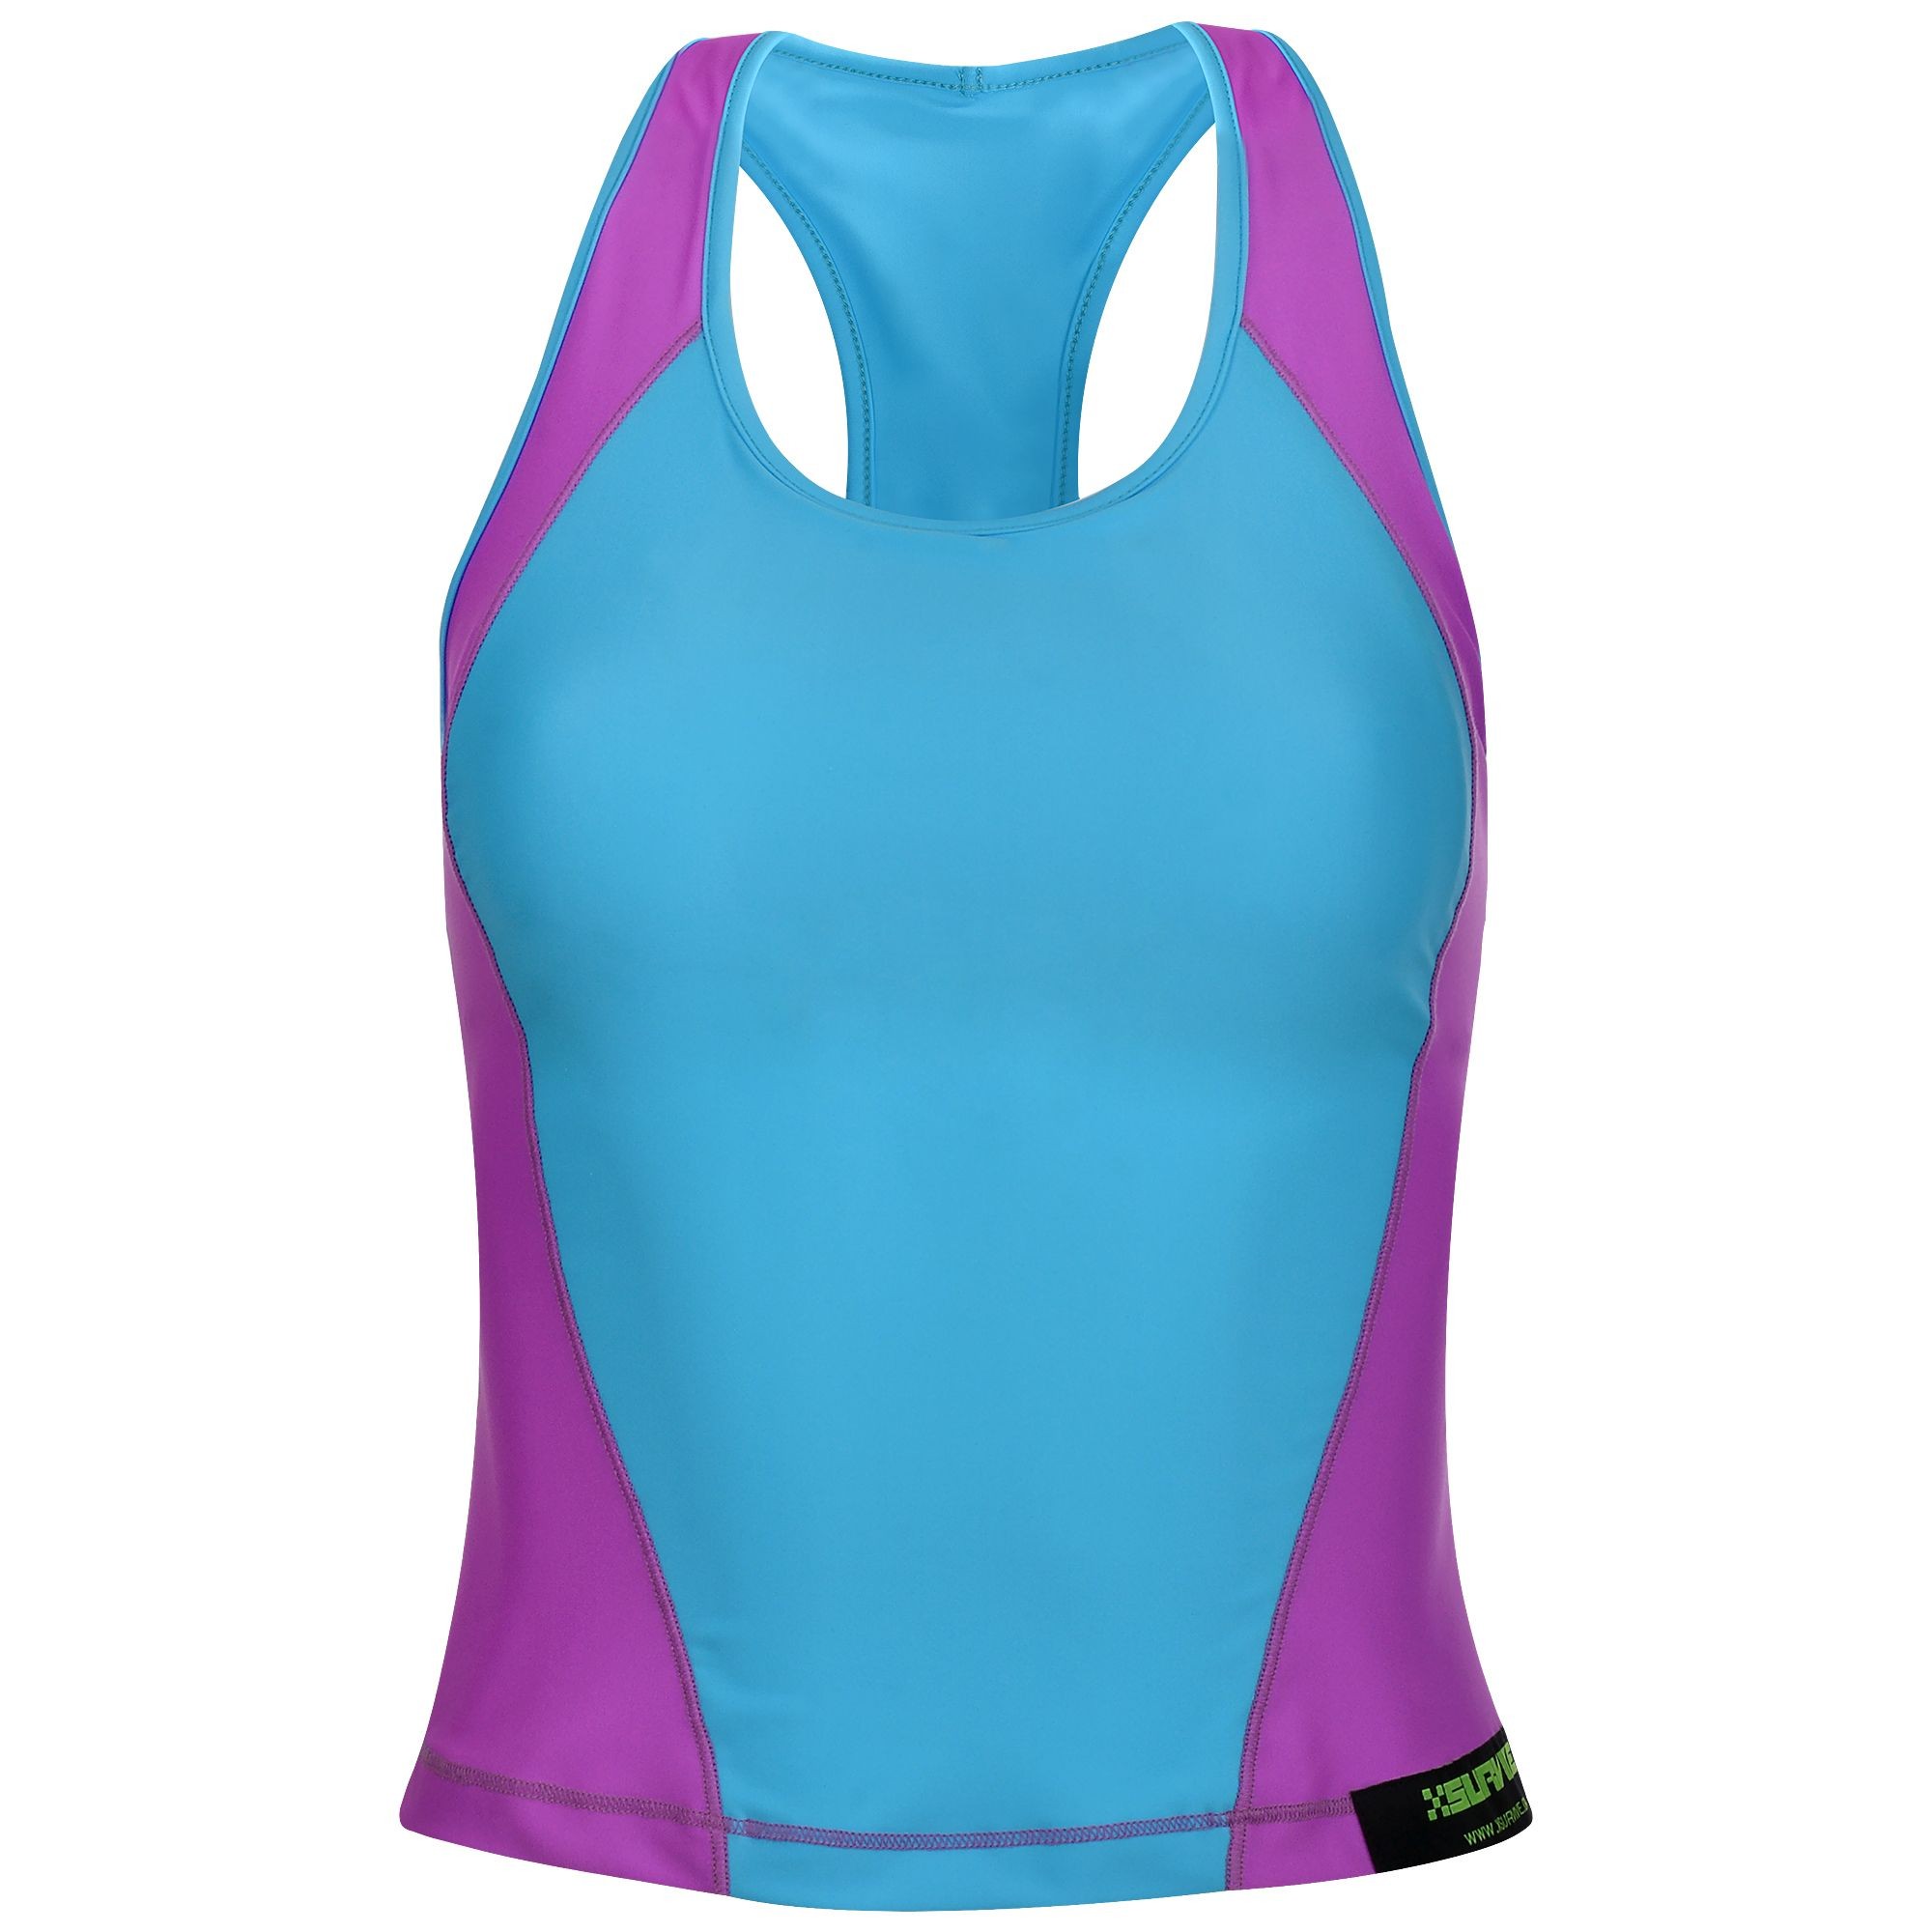 XSURVIVE purple women outdoor rashguard for sports and fitness outfit